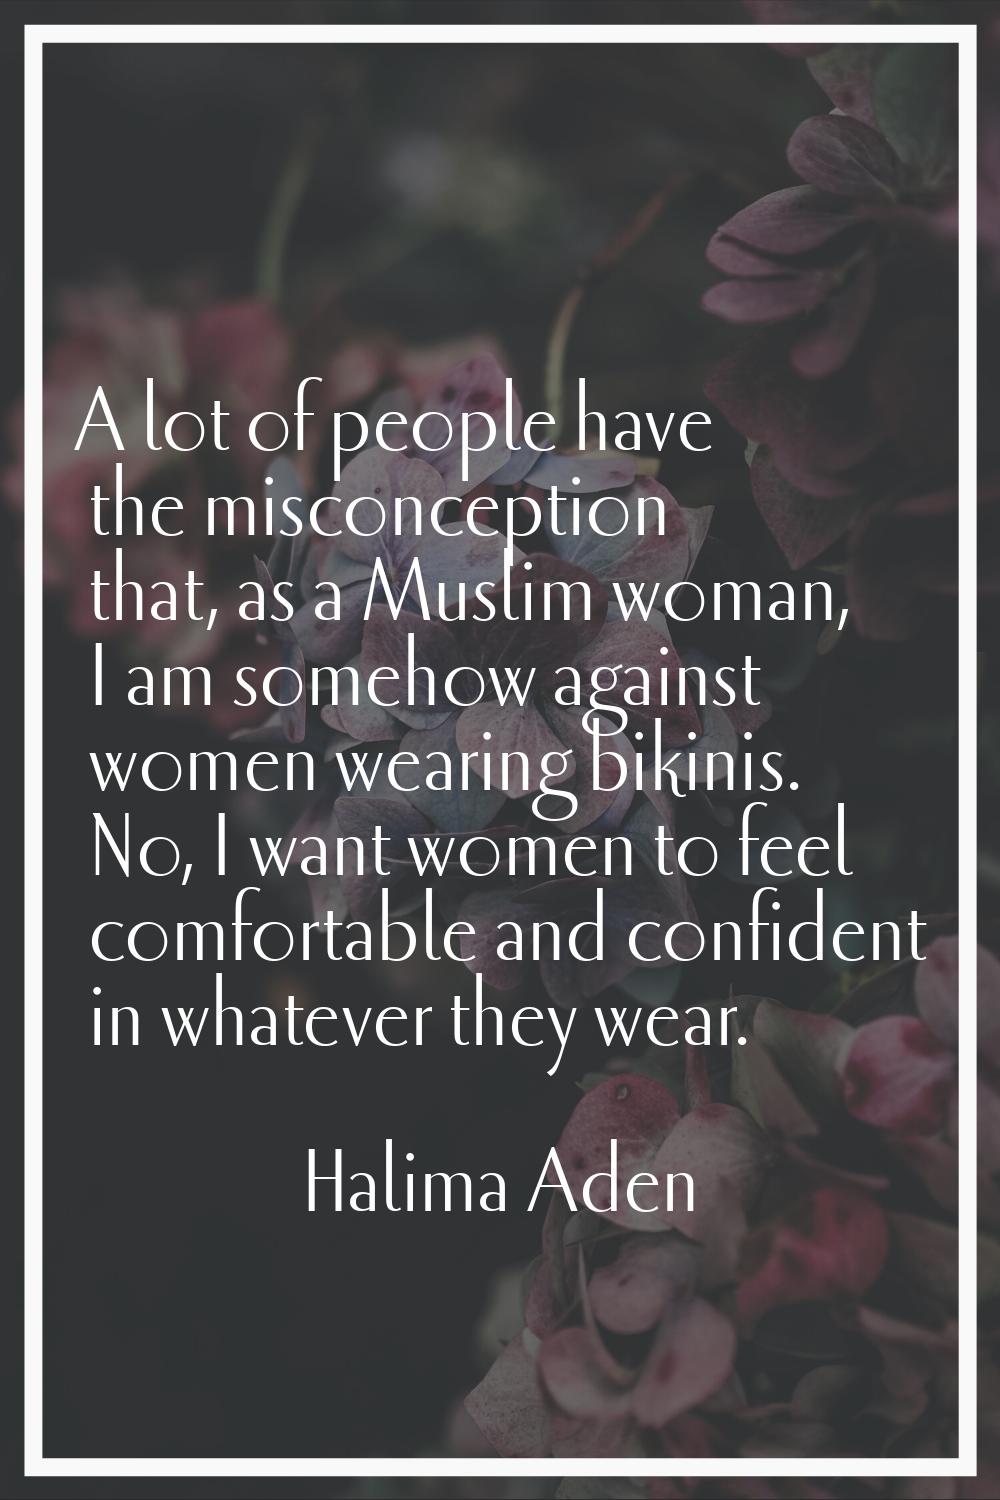 A lot of people have the misconception that, as a Muslim woman, I am somehow against women wearing 